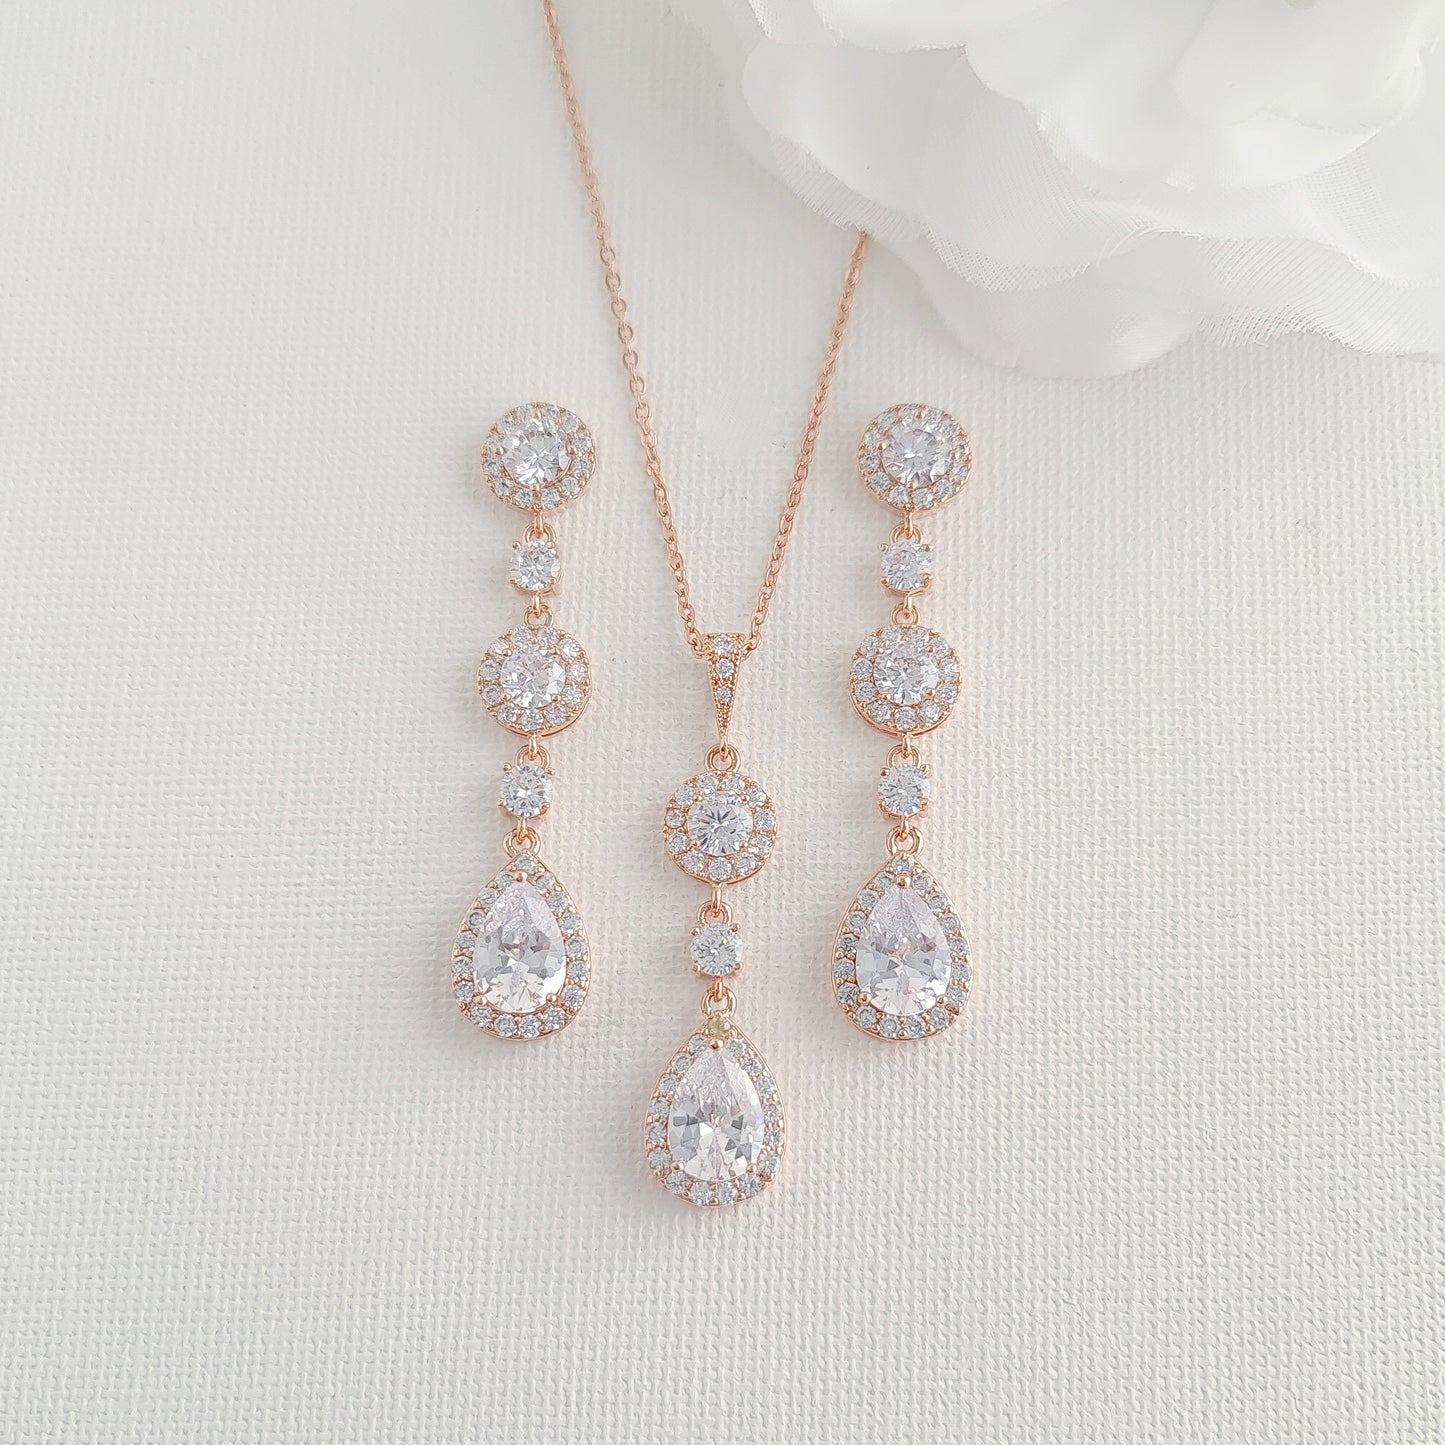 Round and Teardrop Earrings Necklace Set in Gold-Reagan